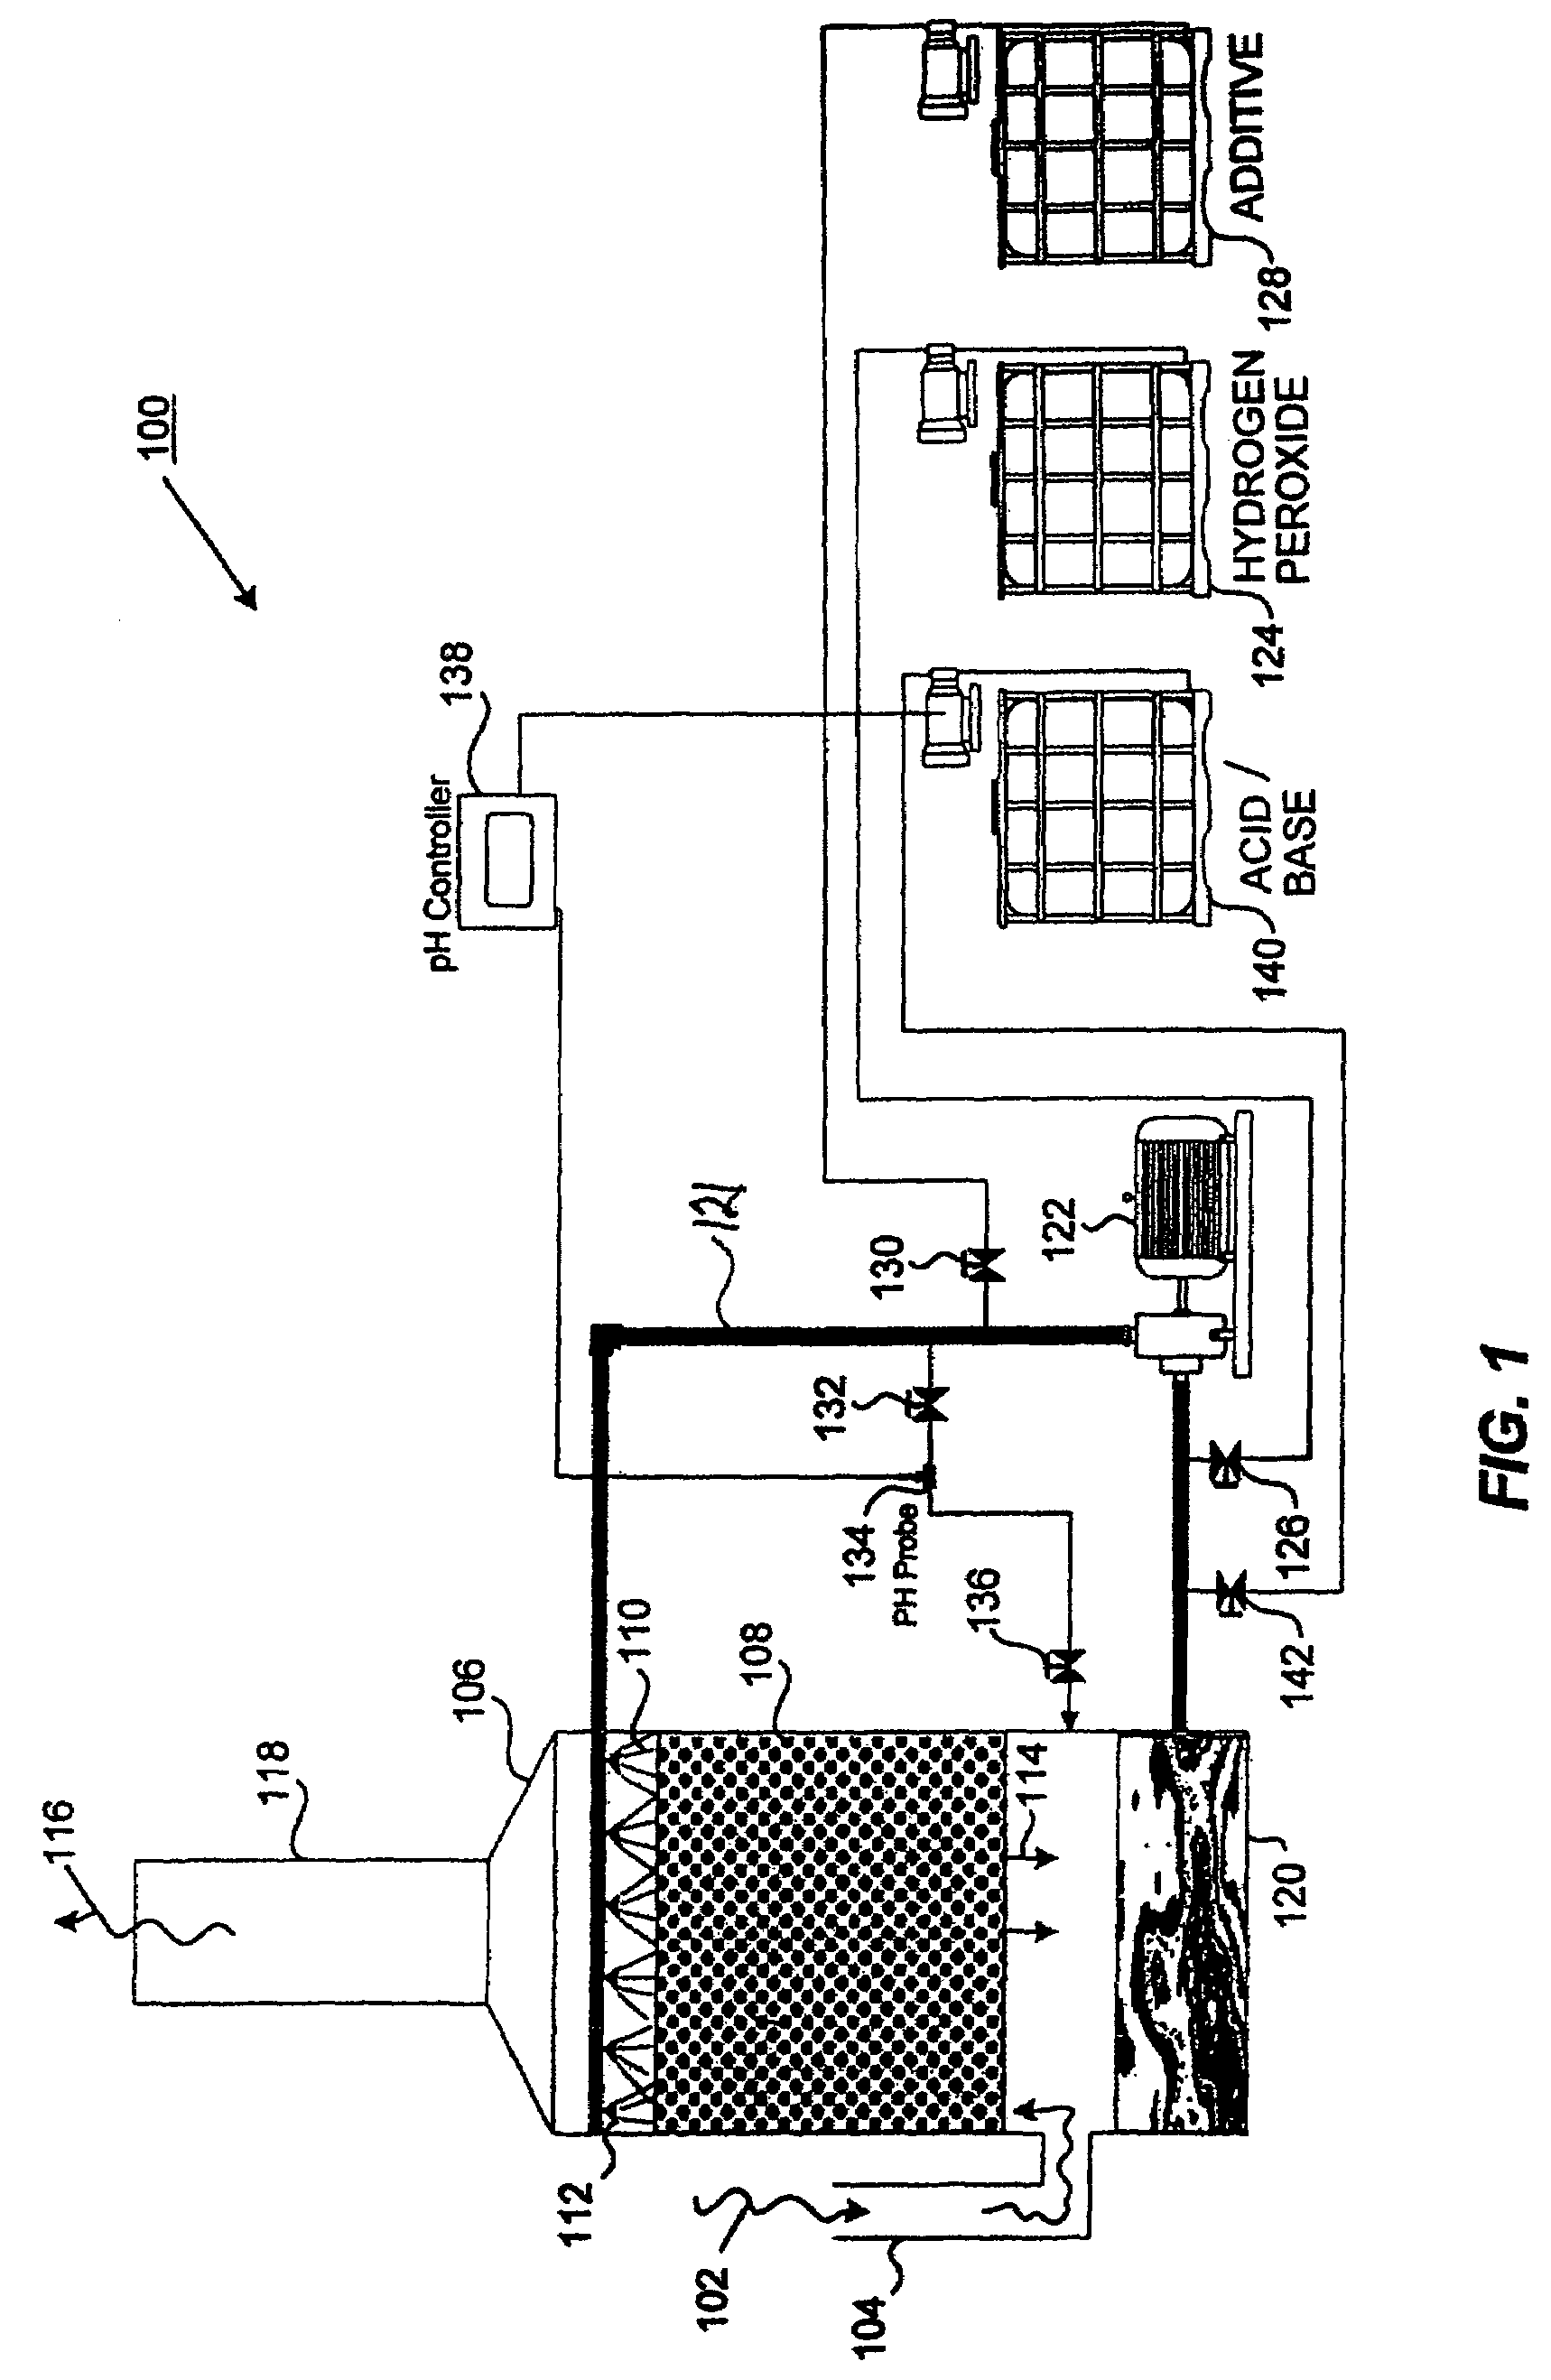 Method and apparatus for use of reacted hydrogen peroxide compounds in industrial process waters